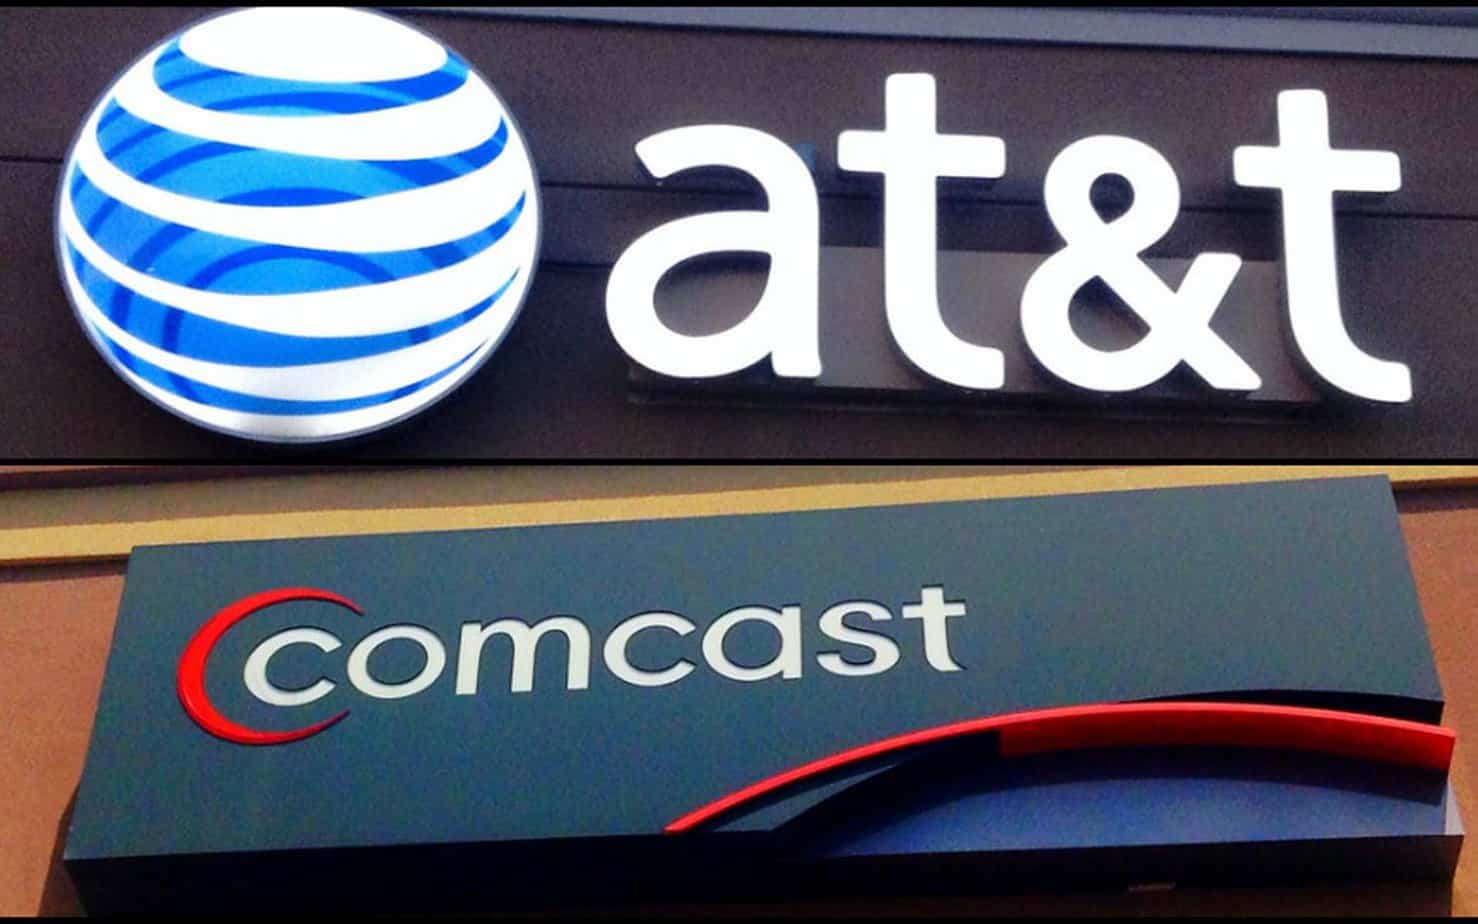 INTERNET PROVIDERS ARE LOOKING OUT - Comcast and AT&T help out